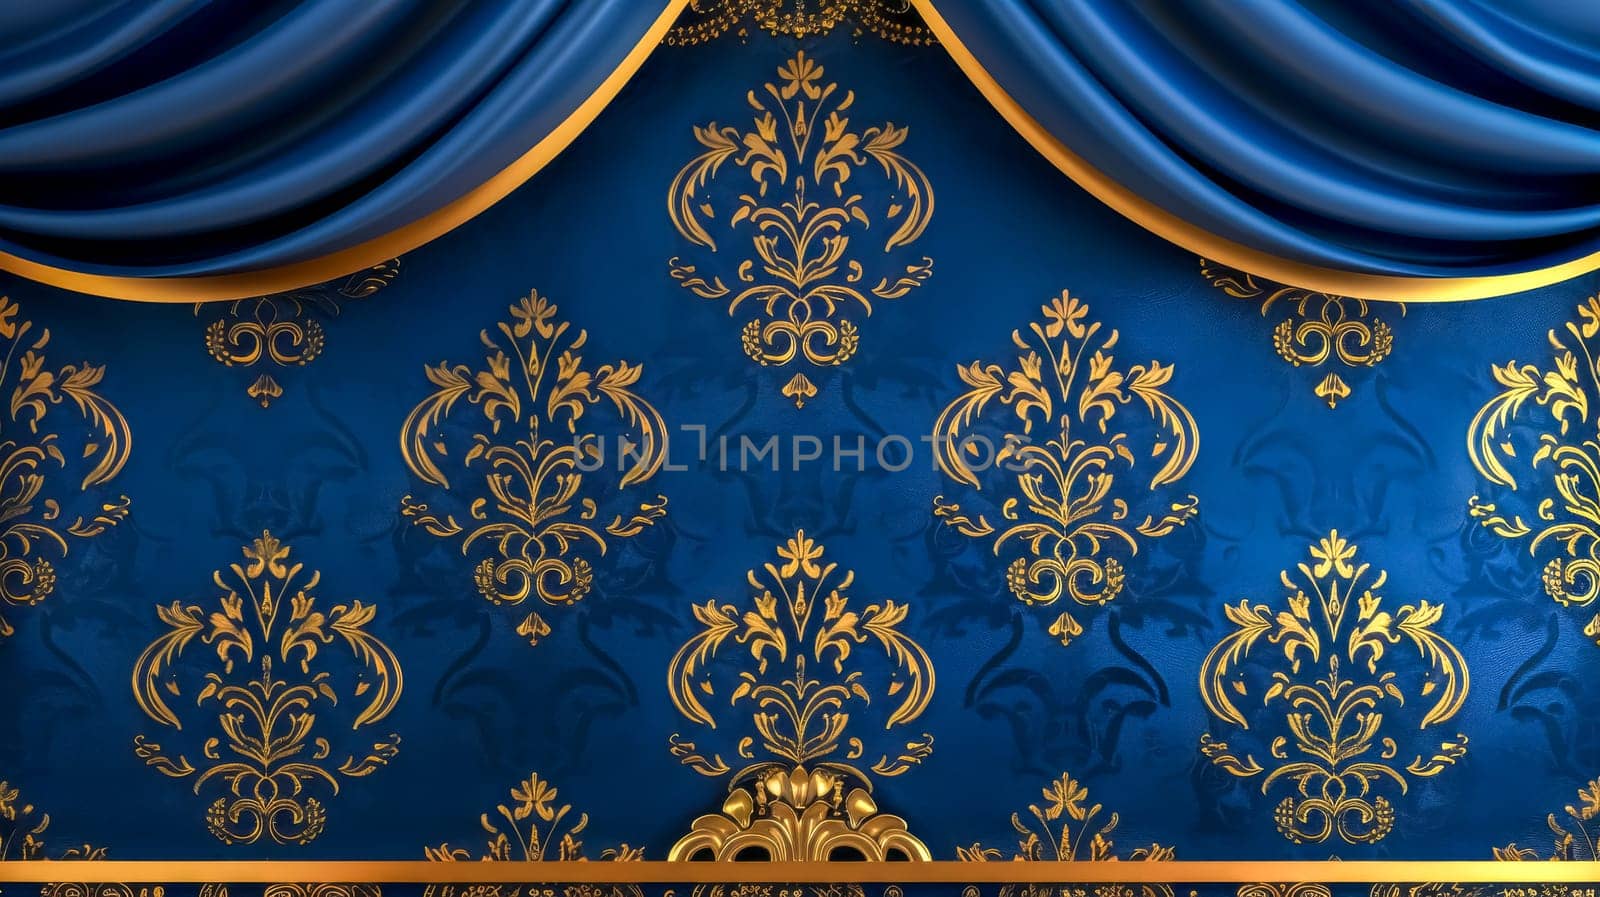 Luxurious blue and gold theater curtain background by Edophoto